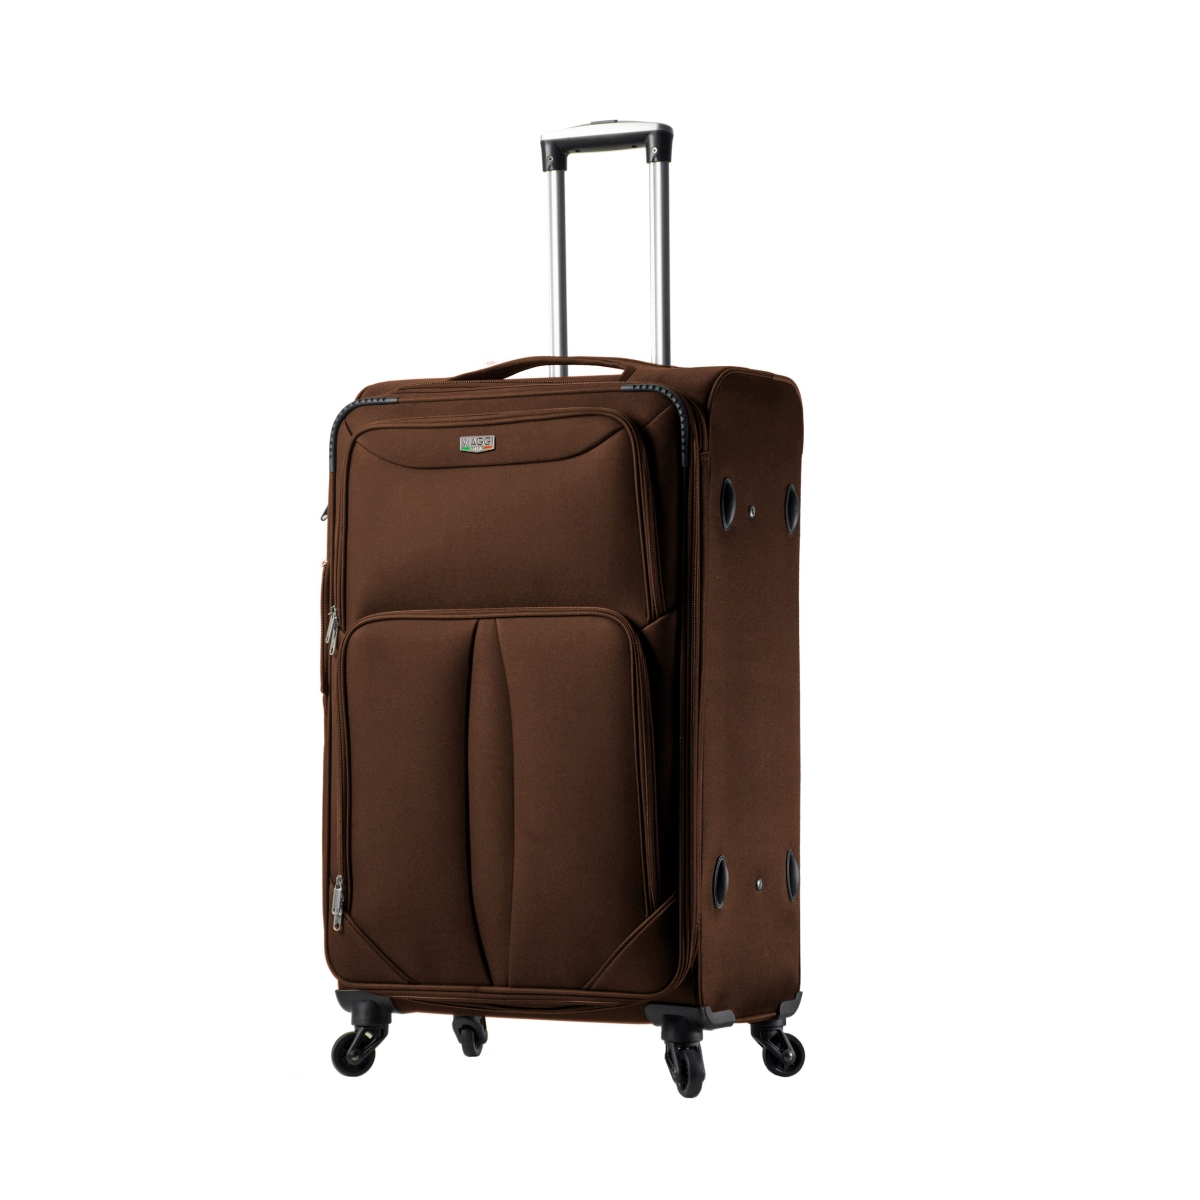 V1100-28in-brw Sione Softside 28 In. Spinner Carry-on, Brown